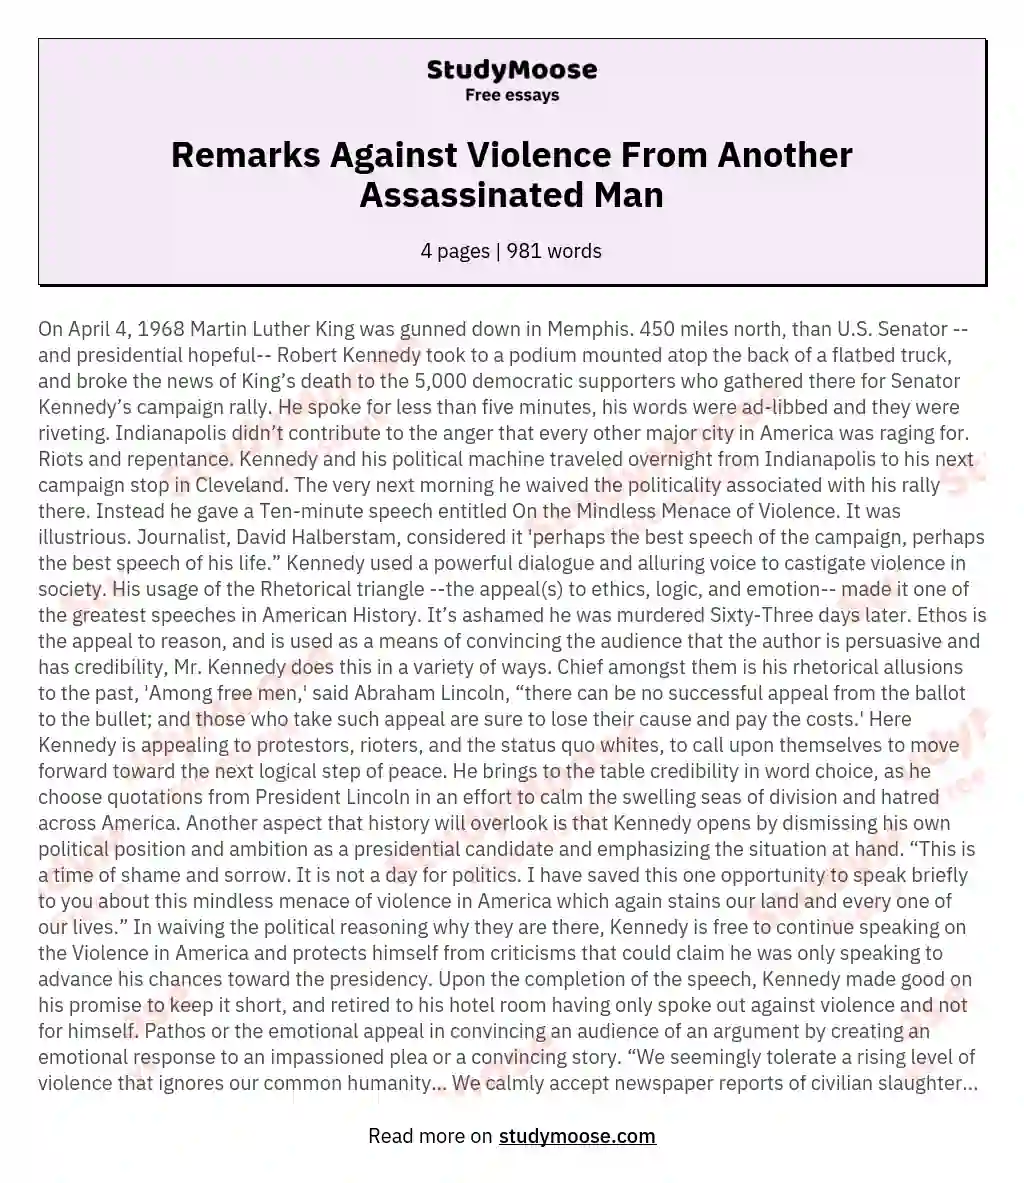 Remarks Against Violence From Another Assassinated Man essay